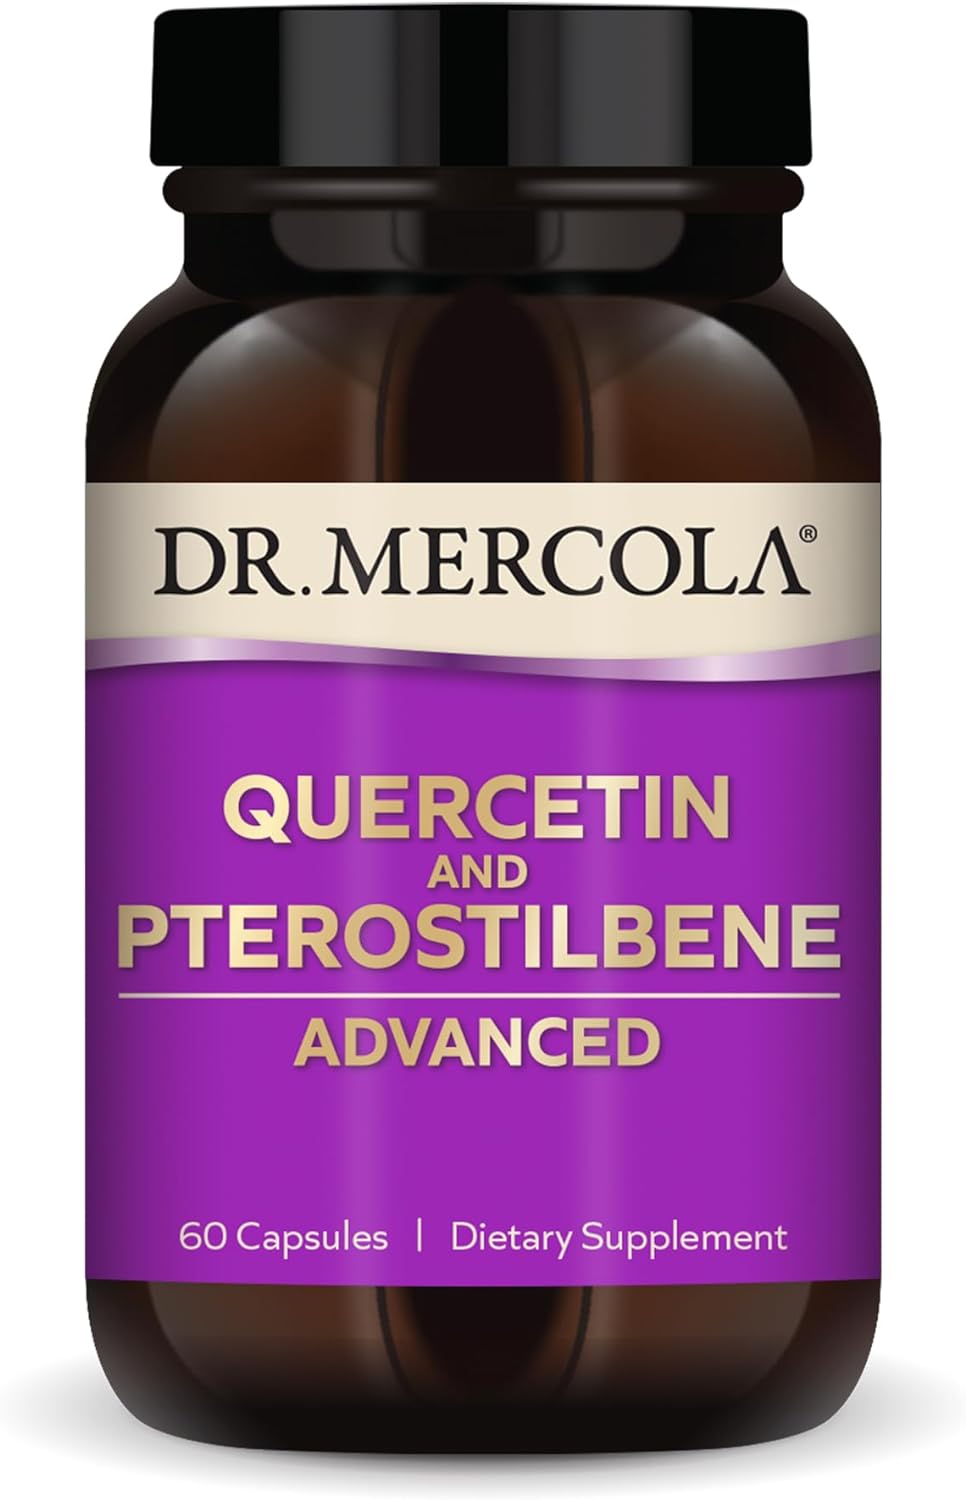 Dr Mercola Quercetin and Pterostilbene Advanced 60 Capsules (30 Day Supply)